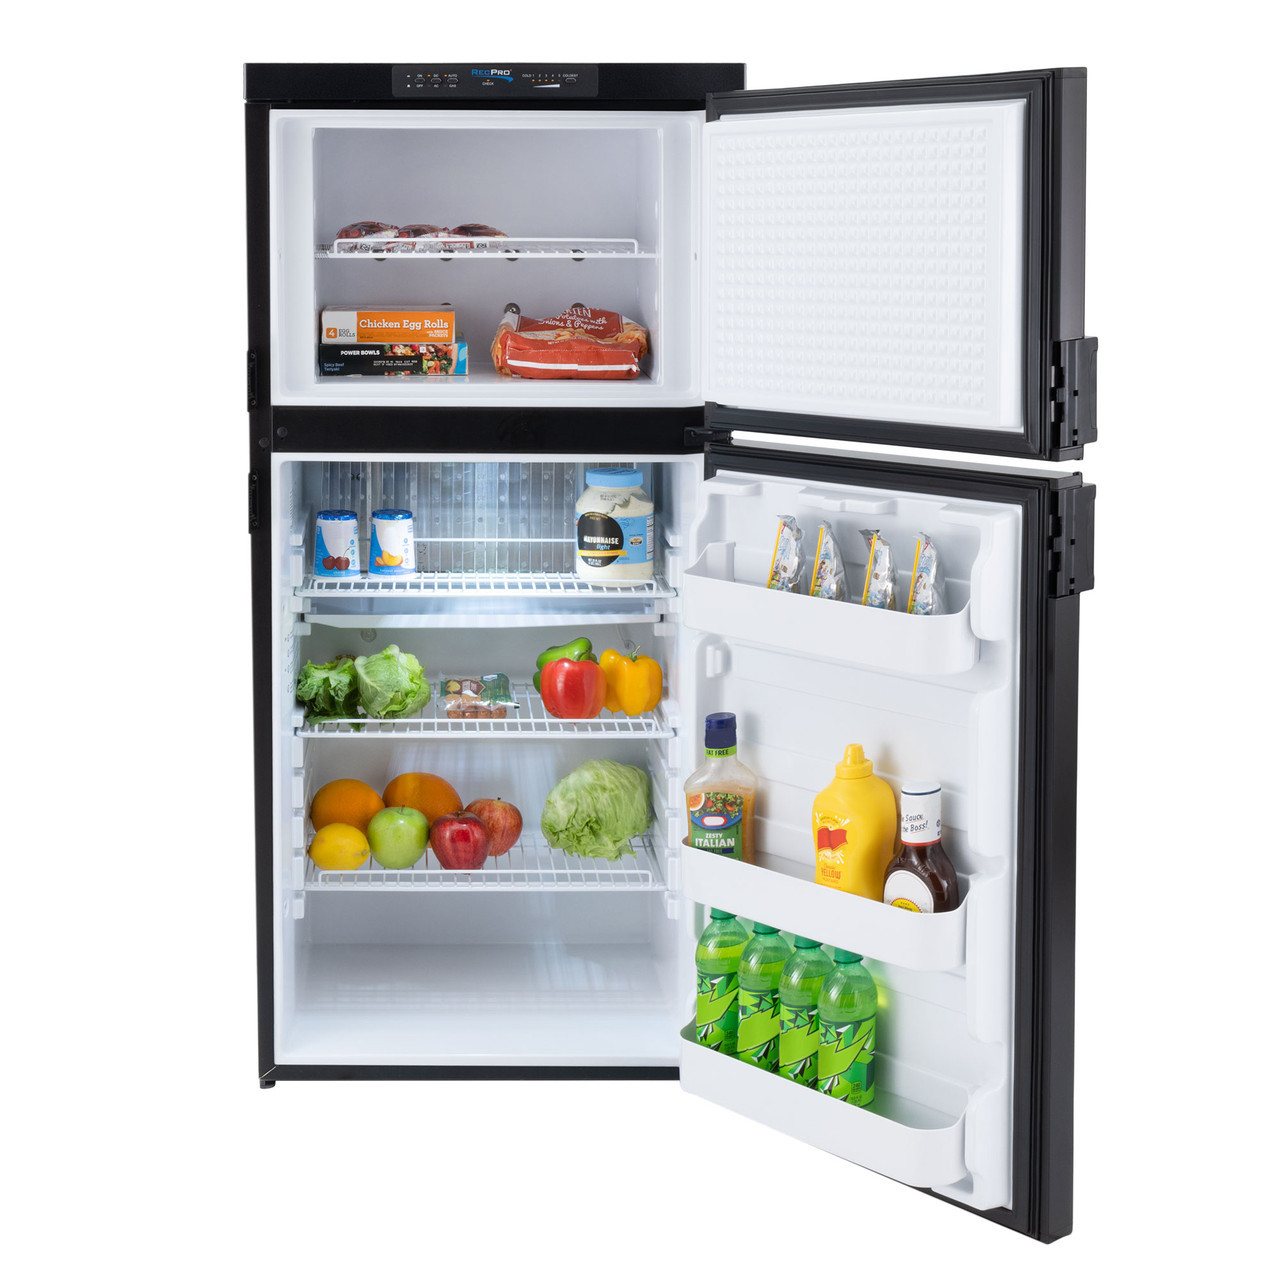 SPECIAL ORDER - See Below For More Info *** Norcold® Refrigerator